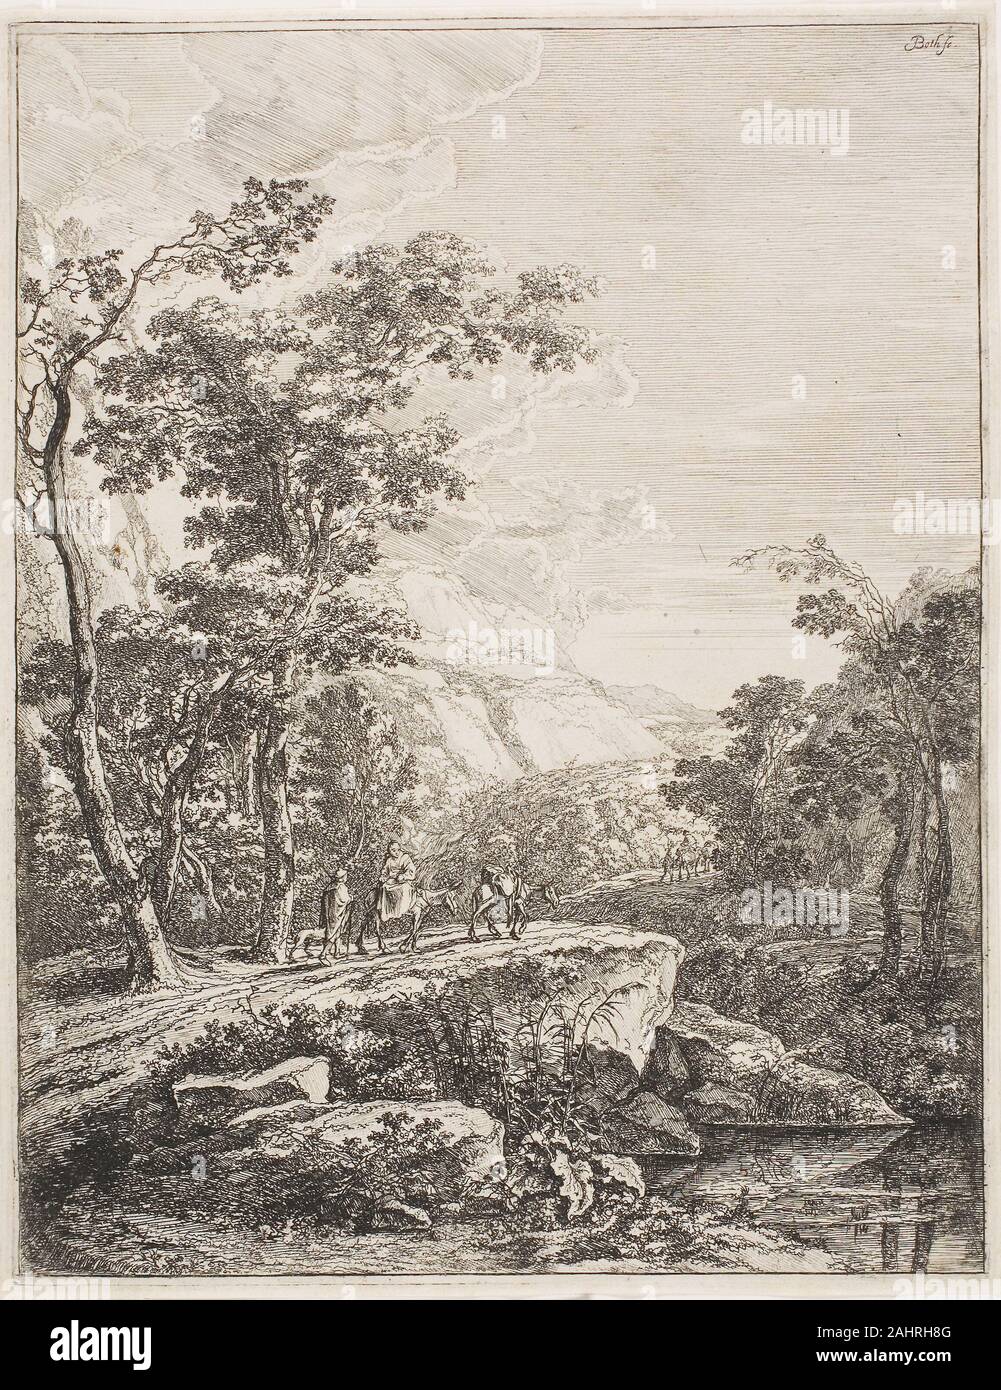 Jan Both. Upright Italian Landscapes Woman on a Mule. 1638–1652. Holland. Etching on paper Sons of a glass painter, Jan and Andries Both studied for a time with the Utrecht painter Abraham Bloemaert, and went to Rome after 1635. Whereas Andries specialized in peasant and lowlife scenes, Jan favored Italianate landscapes in the tradition of Claude Lorrain. When his brother drowned in a Venetian canal in 1641, Jan returned to Utrecht. Stock Photo